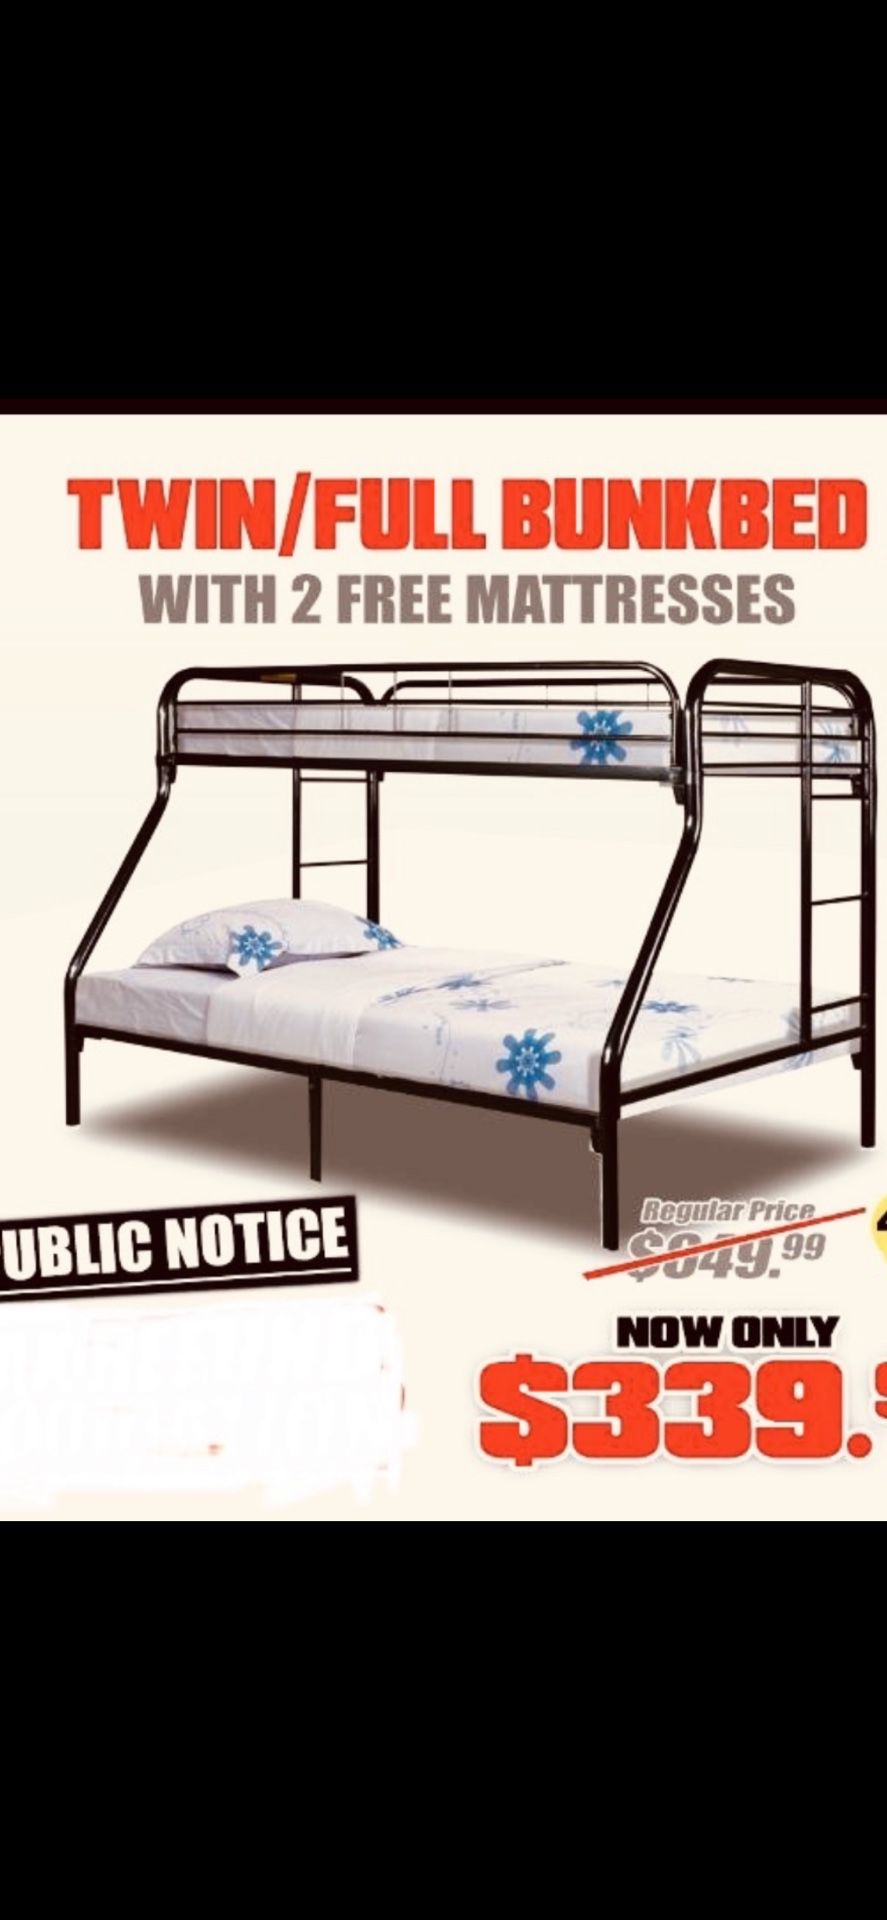 Deal of the month Brand new Twin Full Bunk Bed with Mattress